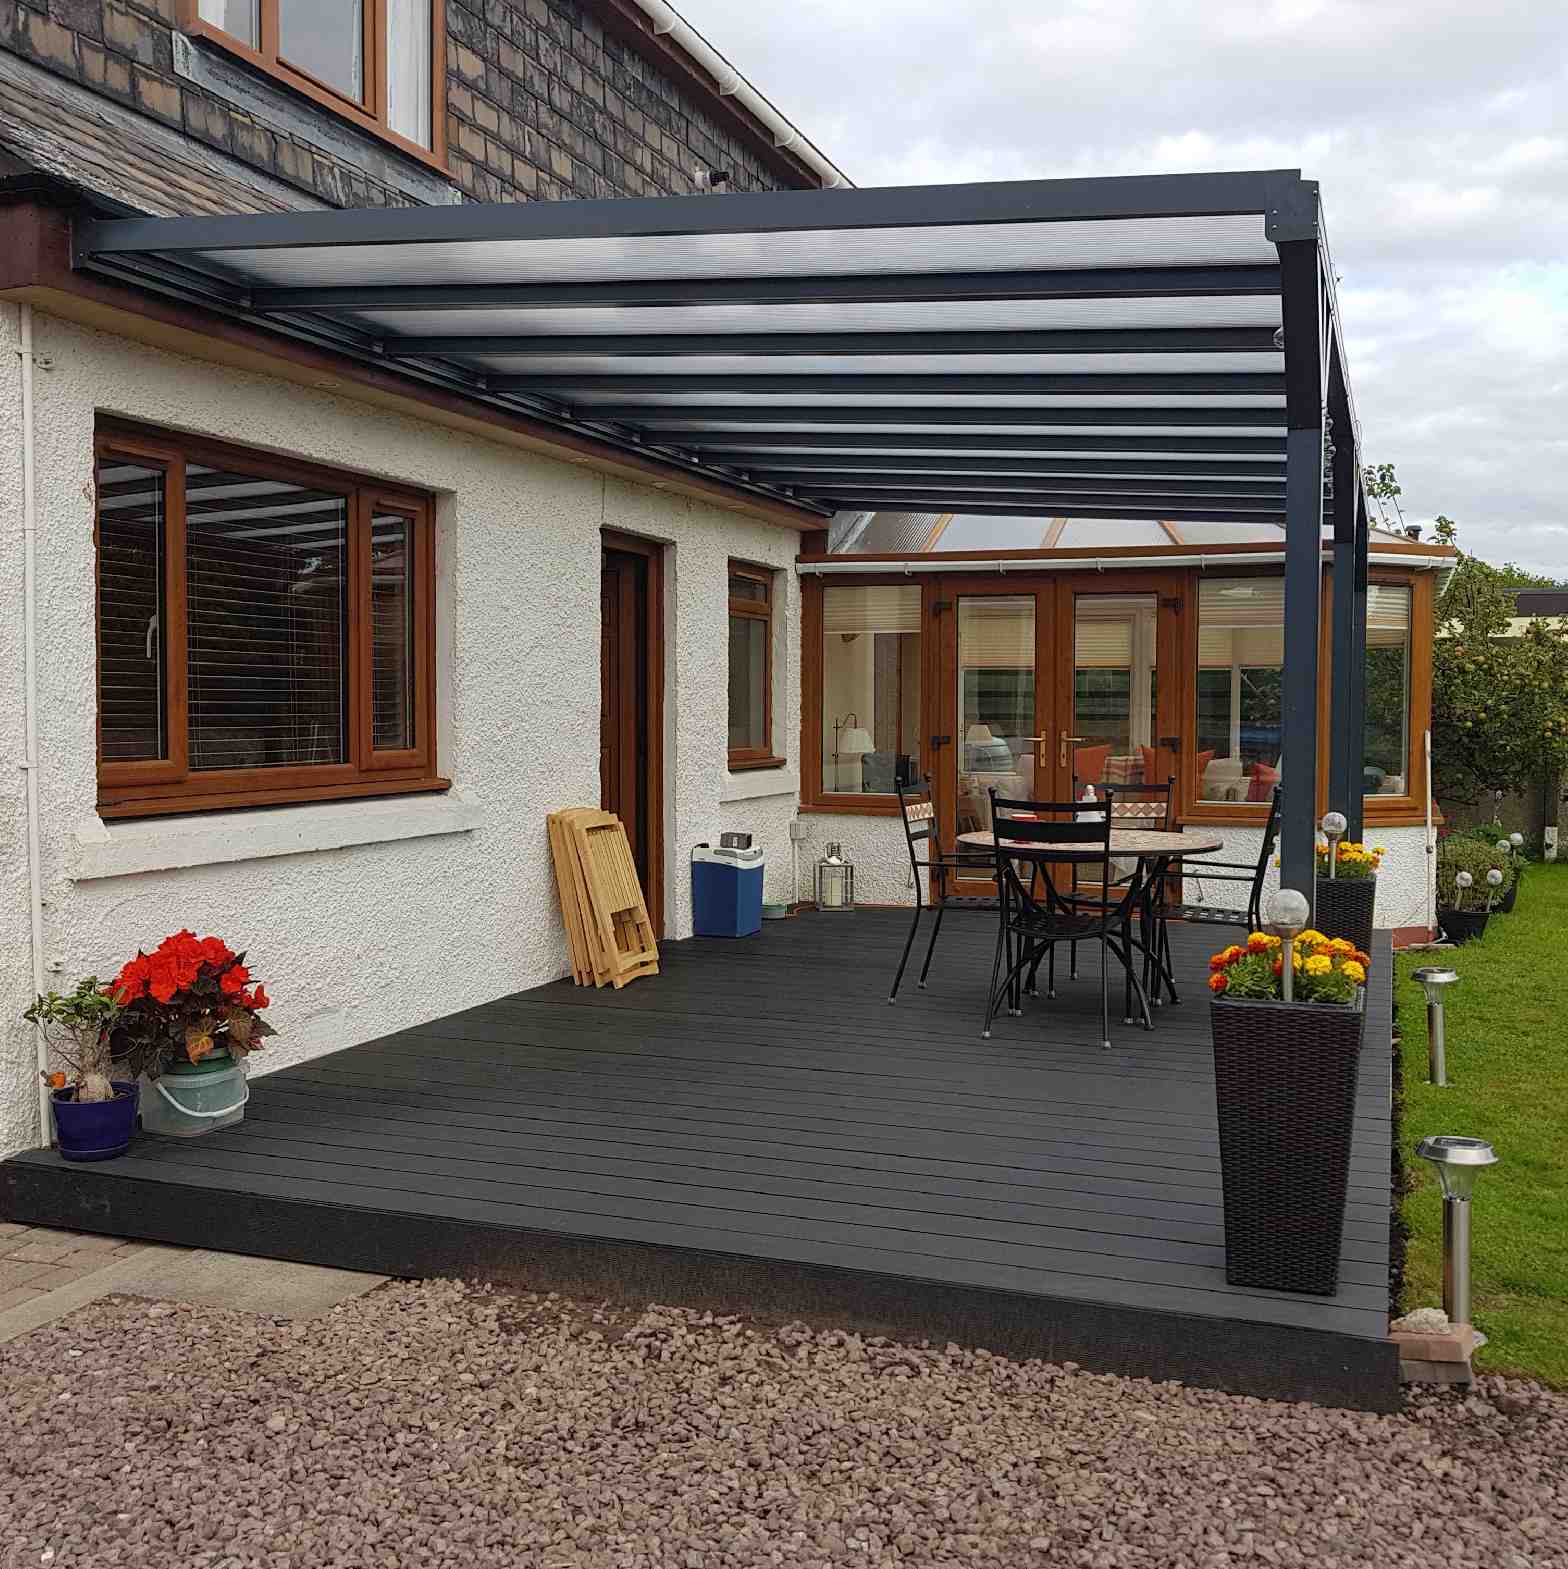 Buy Omega Verandah, Anthracite Grey, 16mm Polycarbonate Glazing - 7.4m (W) x 1.5m (P), (4) Supporting Posts online today